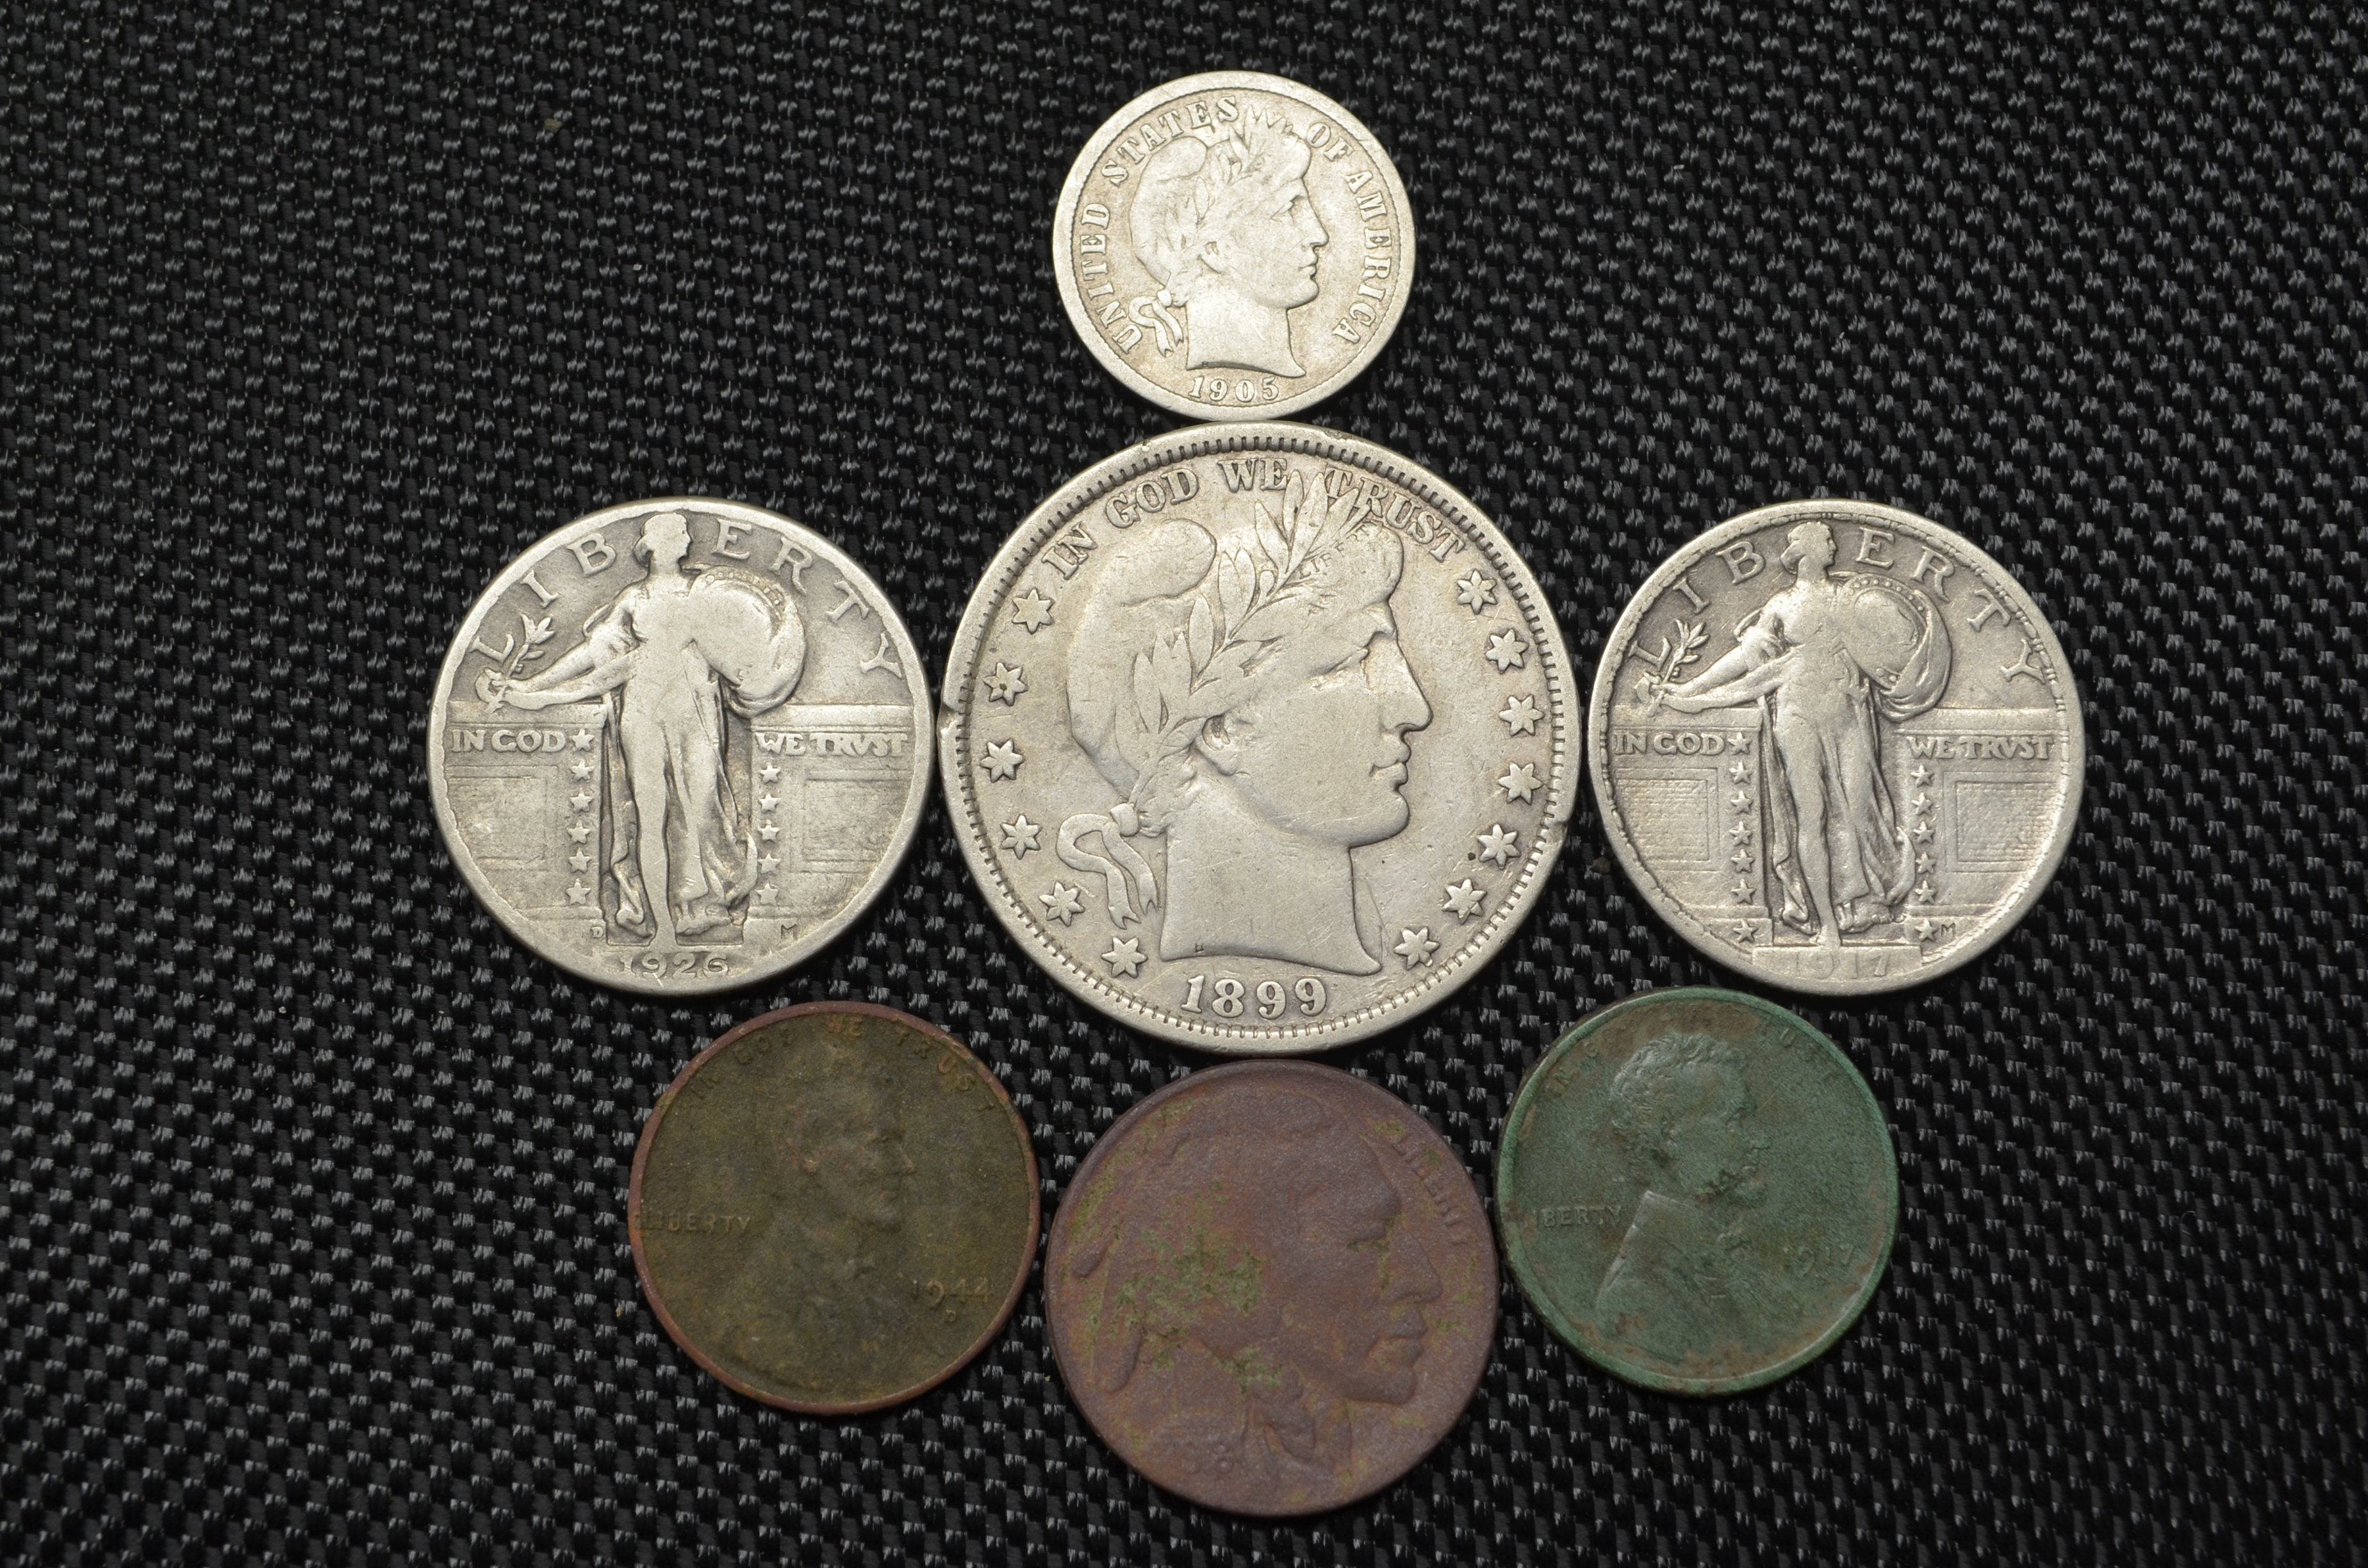 Sweet Silver and Coins Found Near Old Nebraska Home